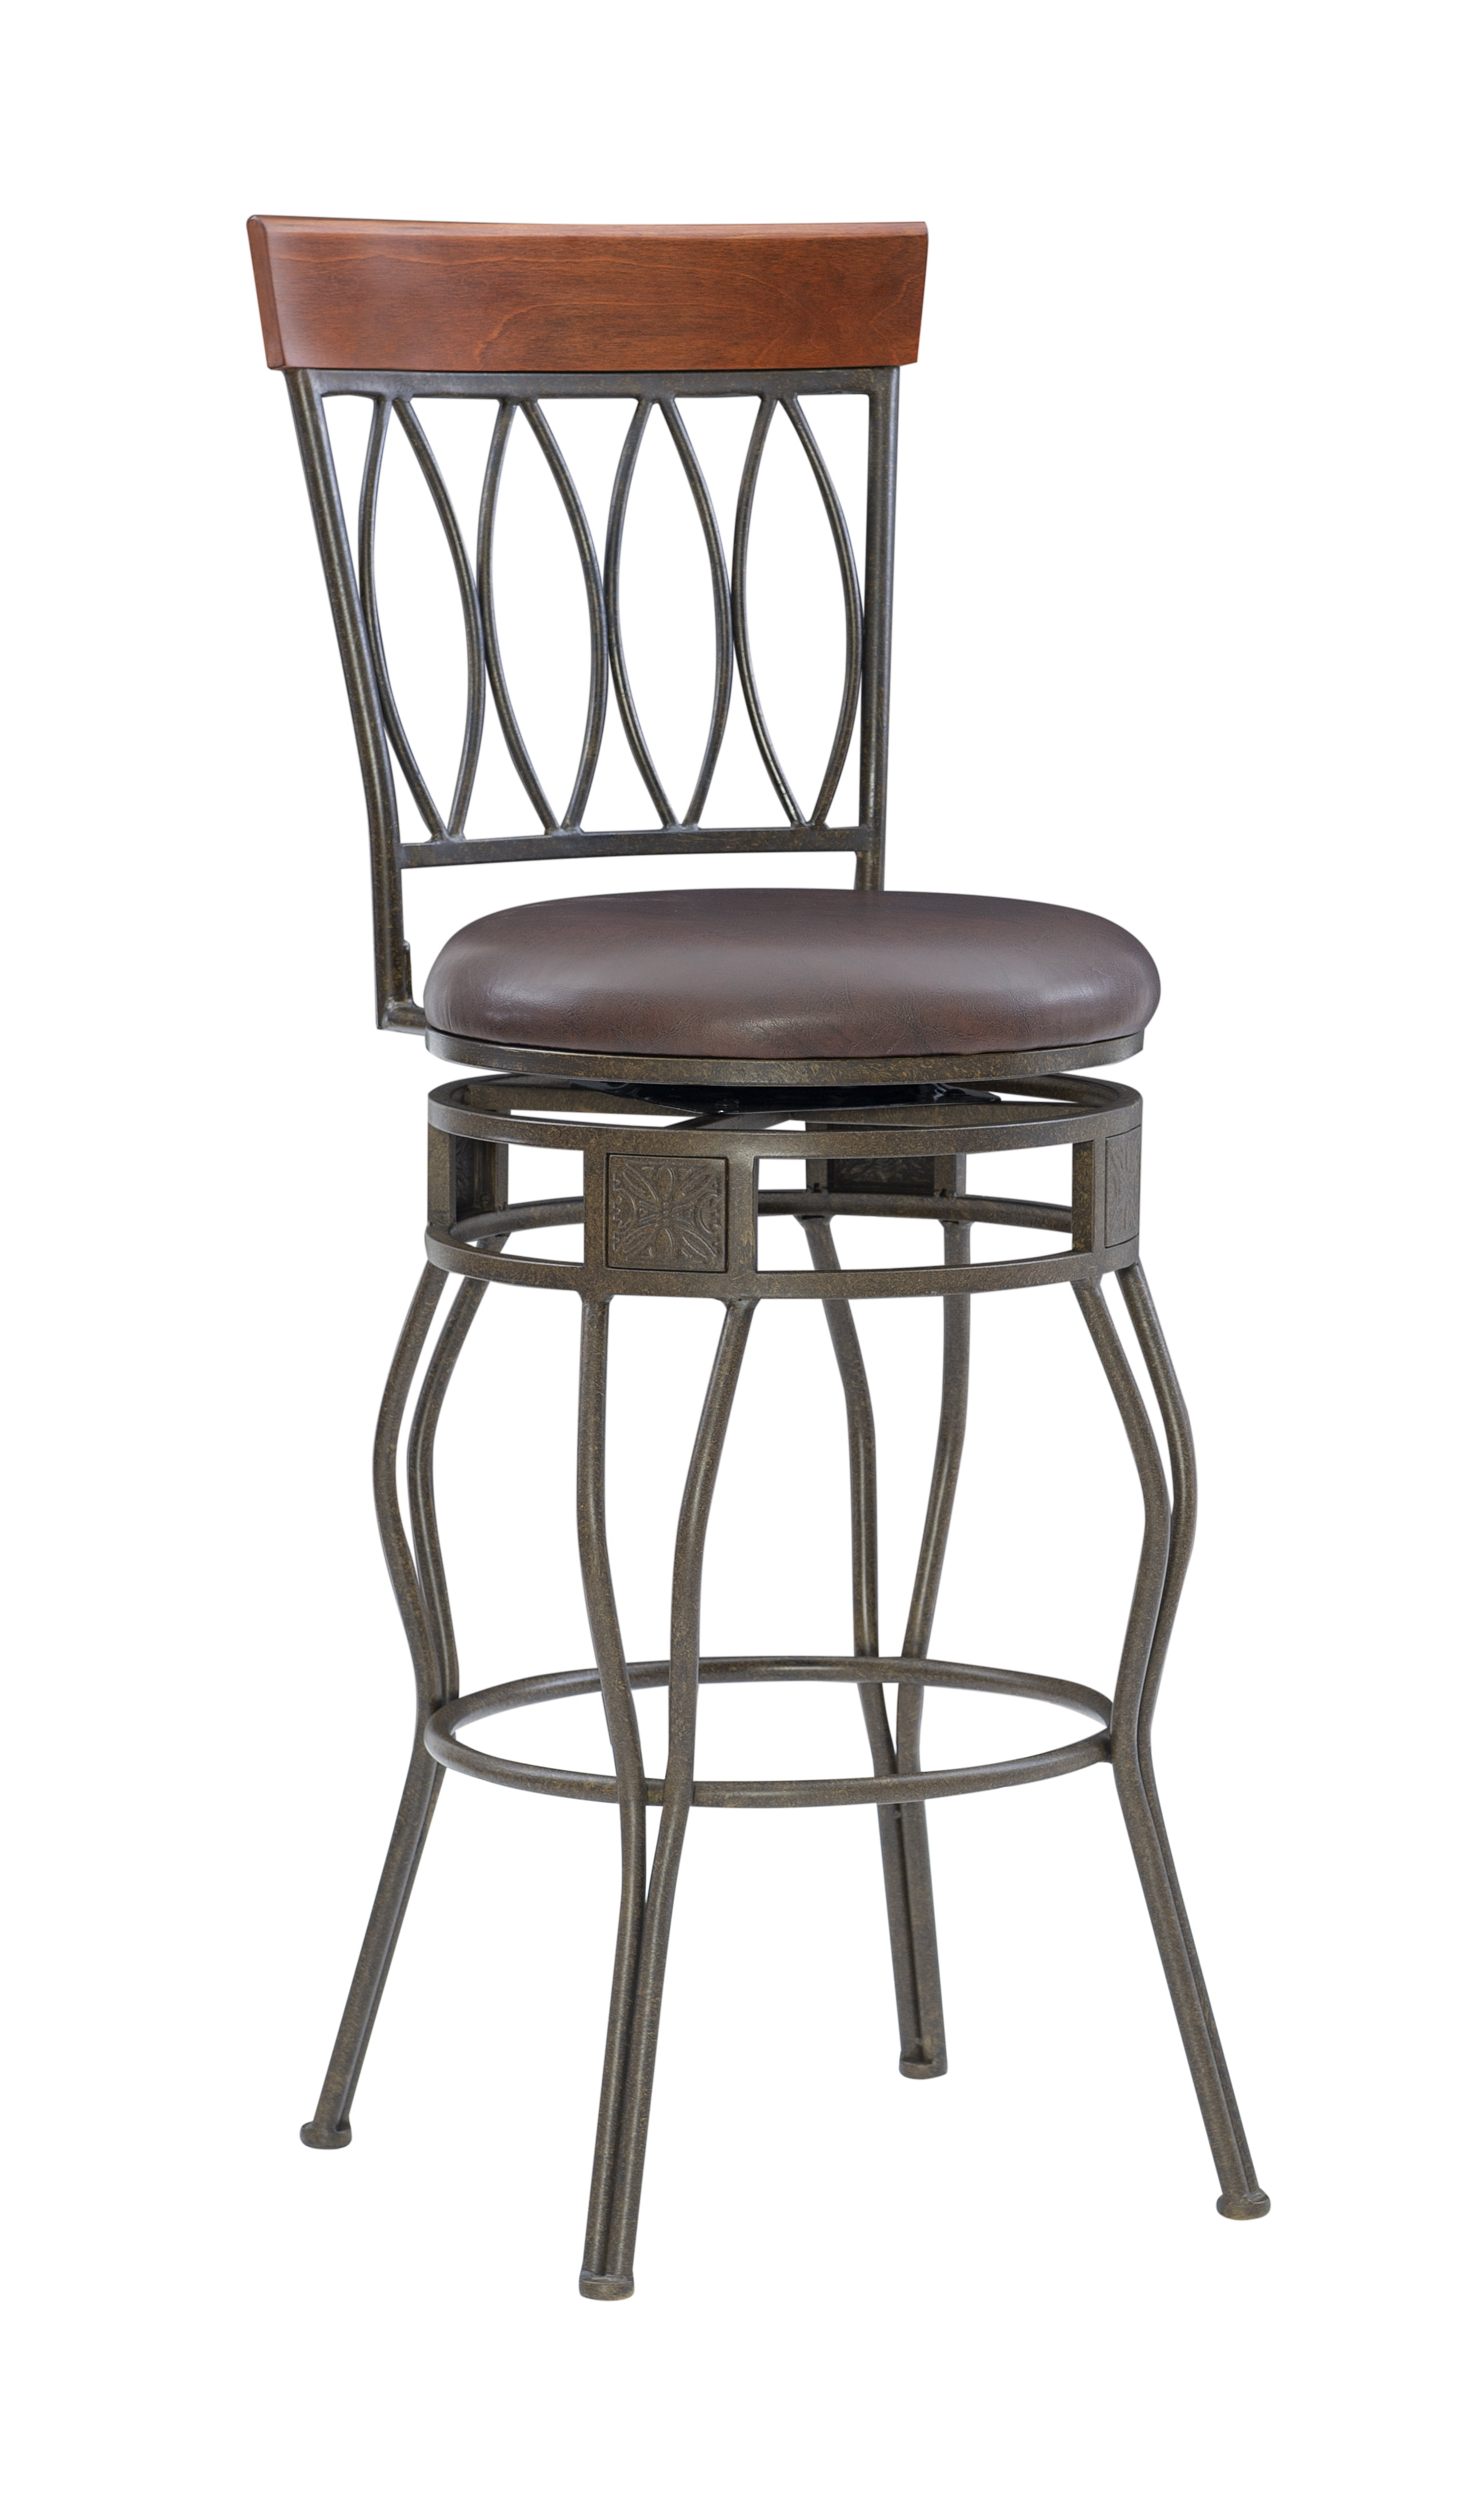 Linon Oval Back Bar Stool Brown 30, Counter Stool Seat Height Inches